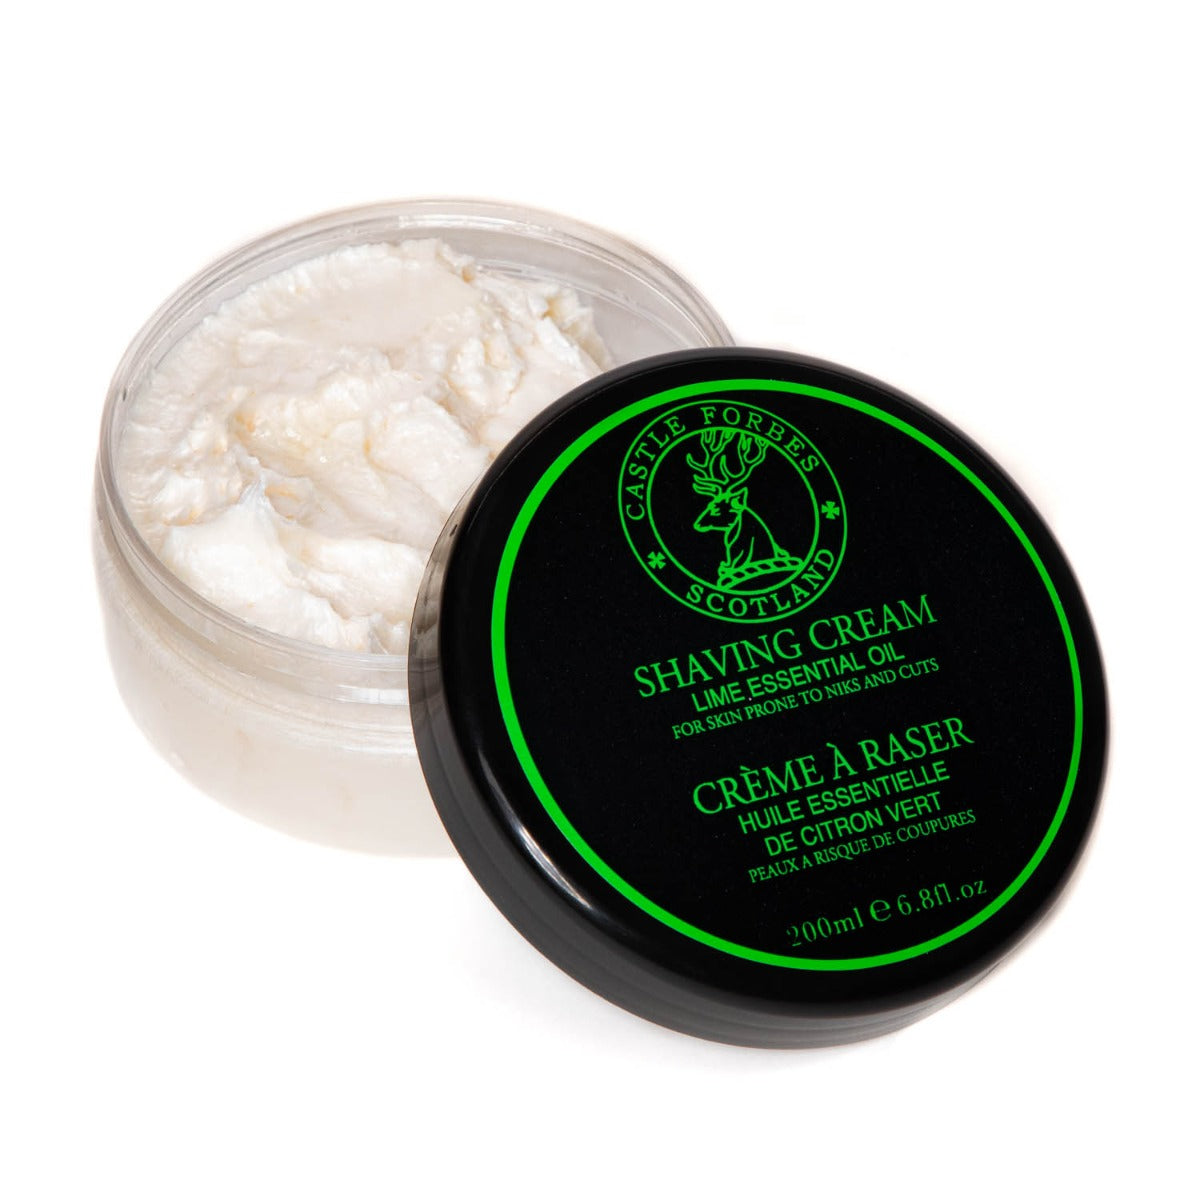 A tin of Castle Forbes Lime Essential Oil Shaving Cream from KirbyAllison.com with lather on a white surface.